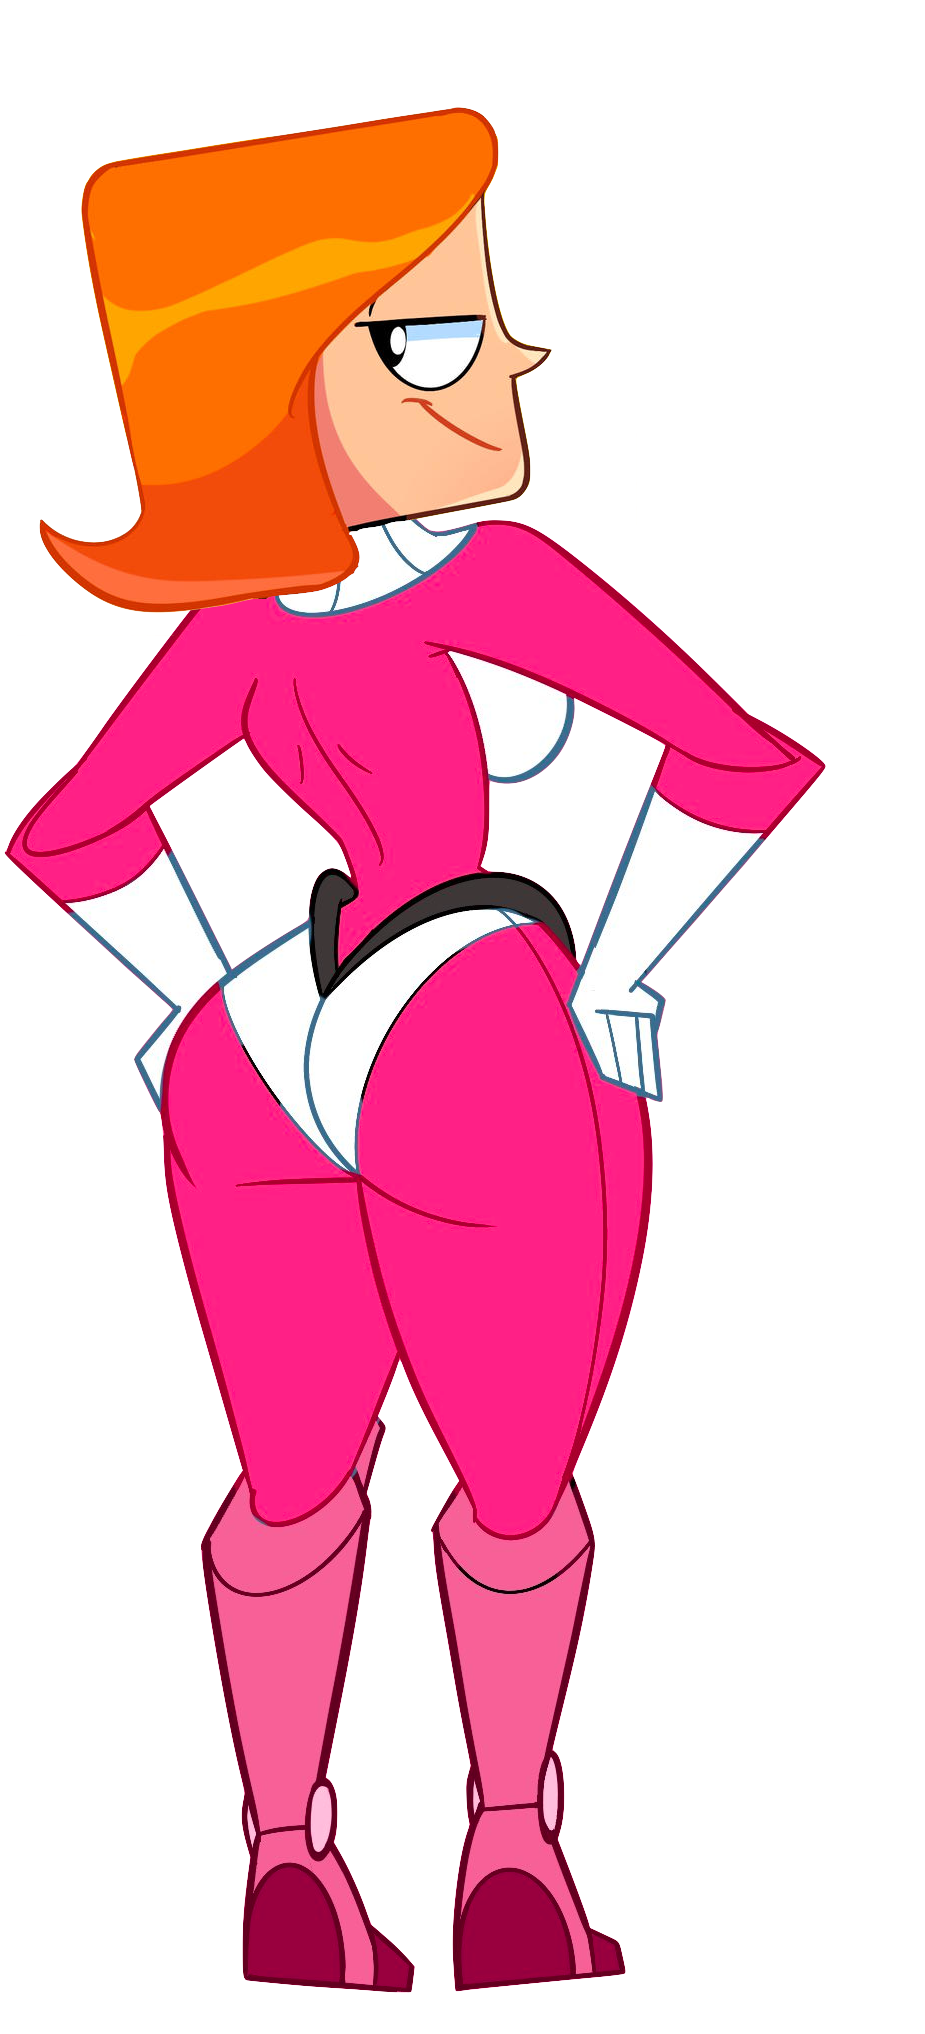 Deb Turnbull In A Spacesuit Showing Off Her Butt By Gmeguy On Deviantart